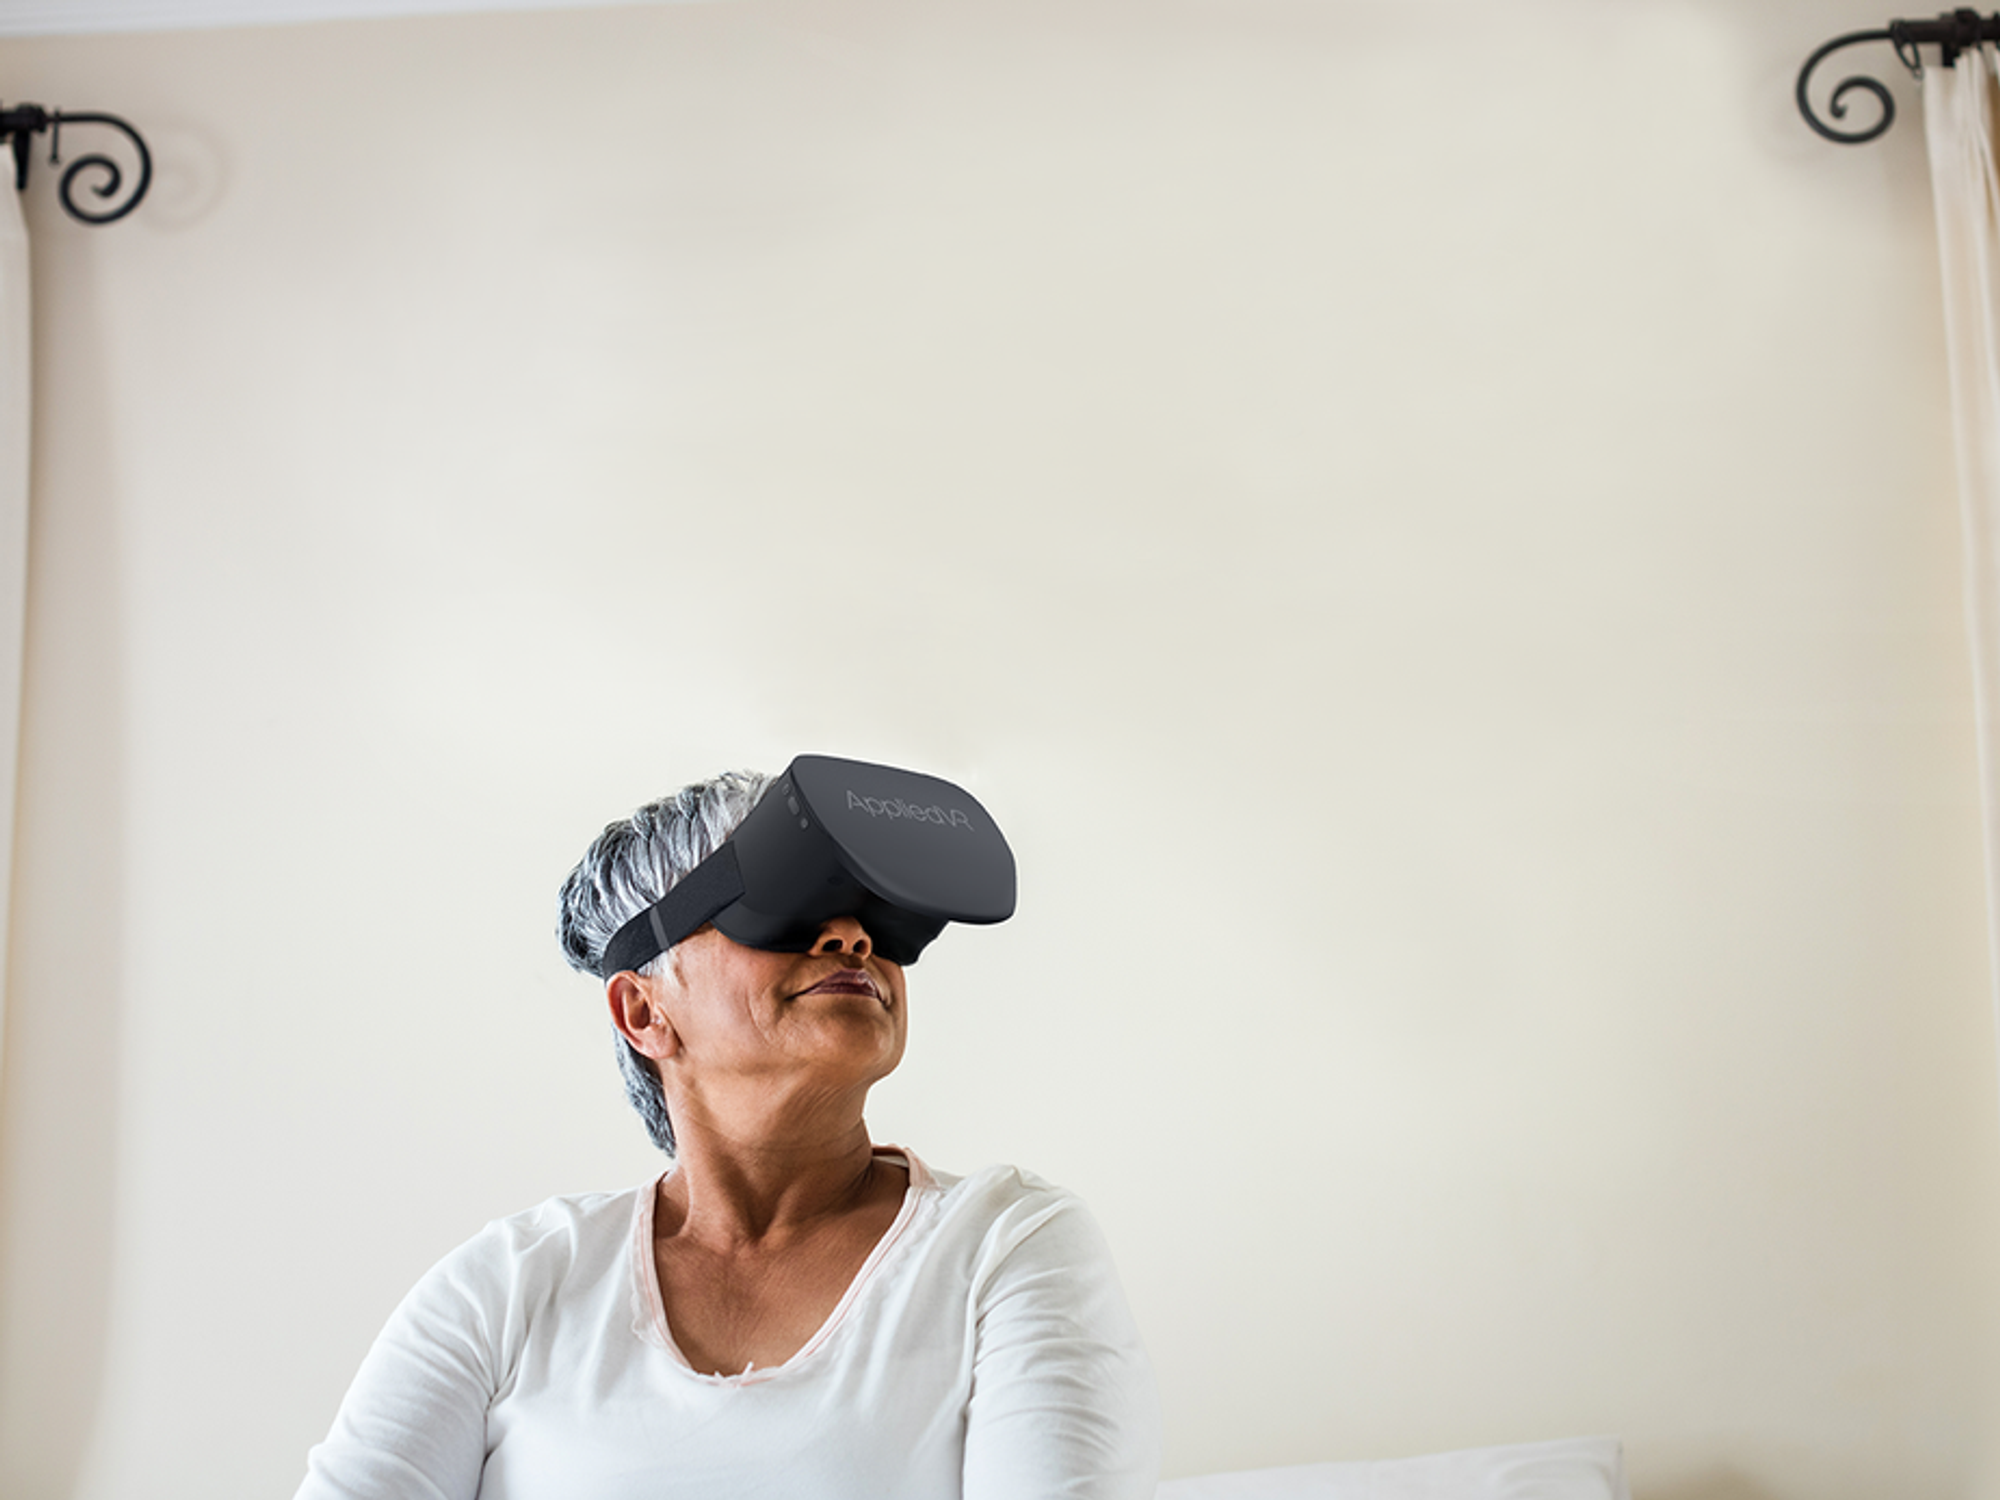 A Virtual Reality Platform to Treat Lower Back Pain Is Now FDA-Approved